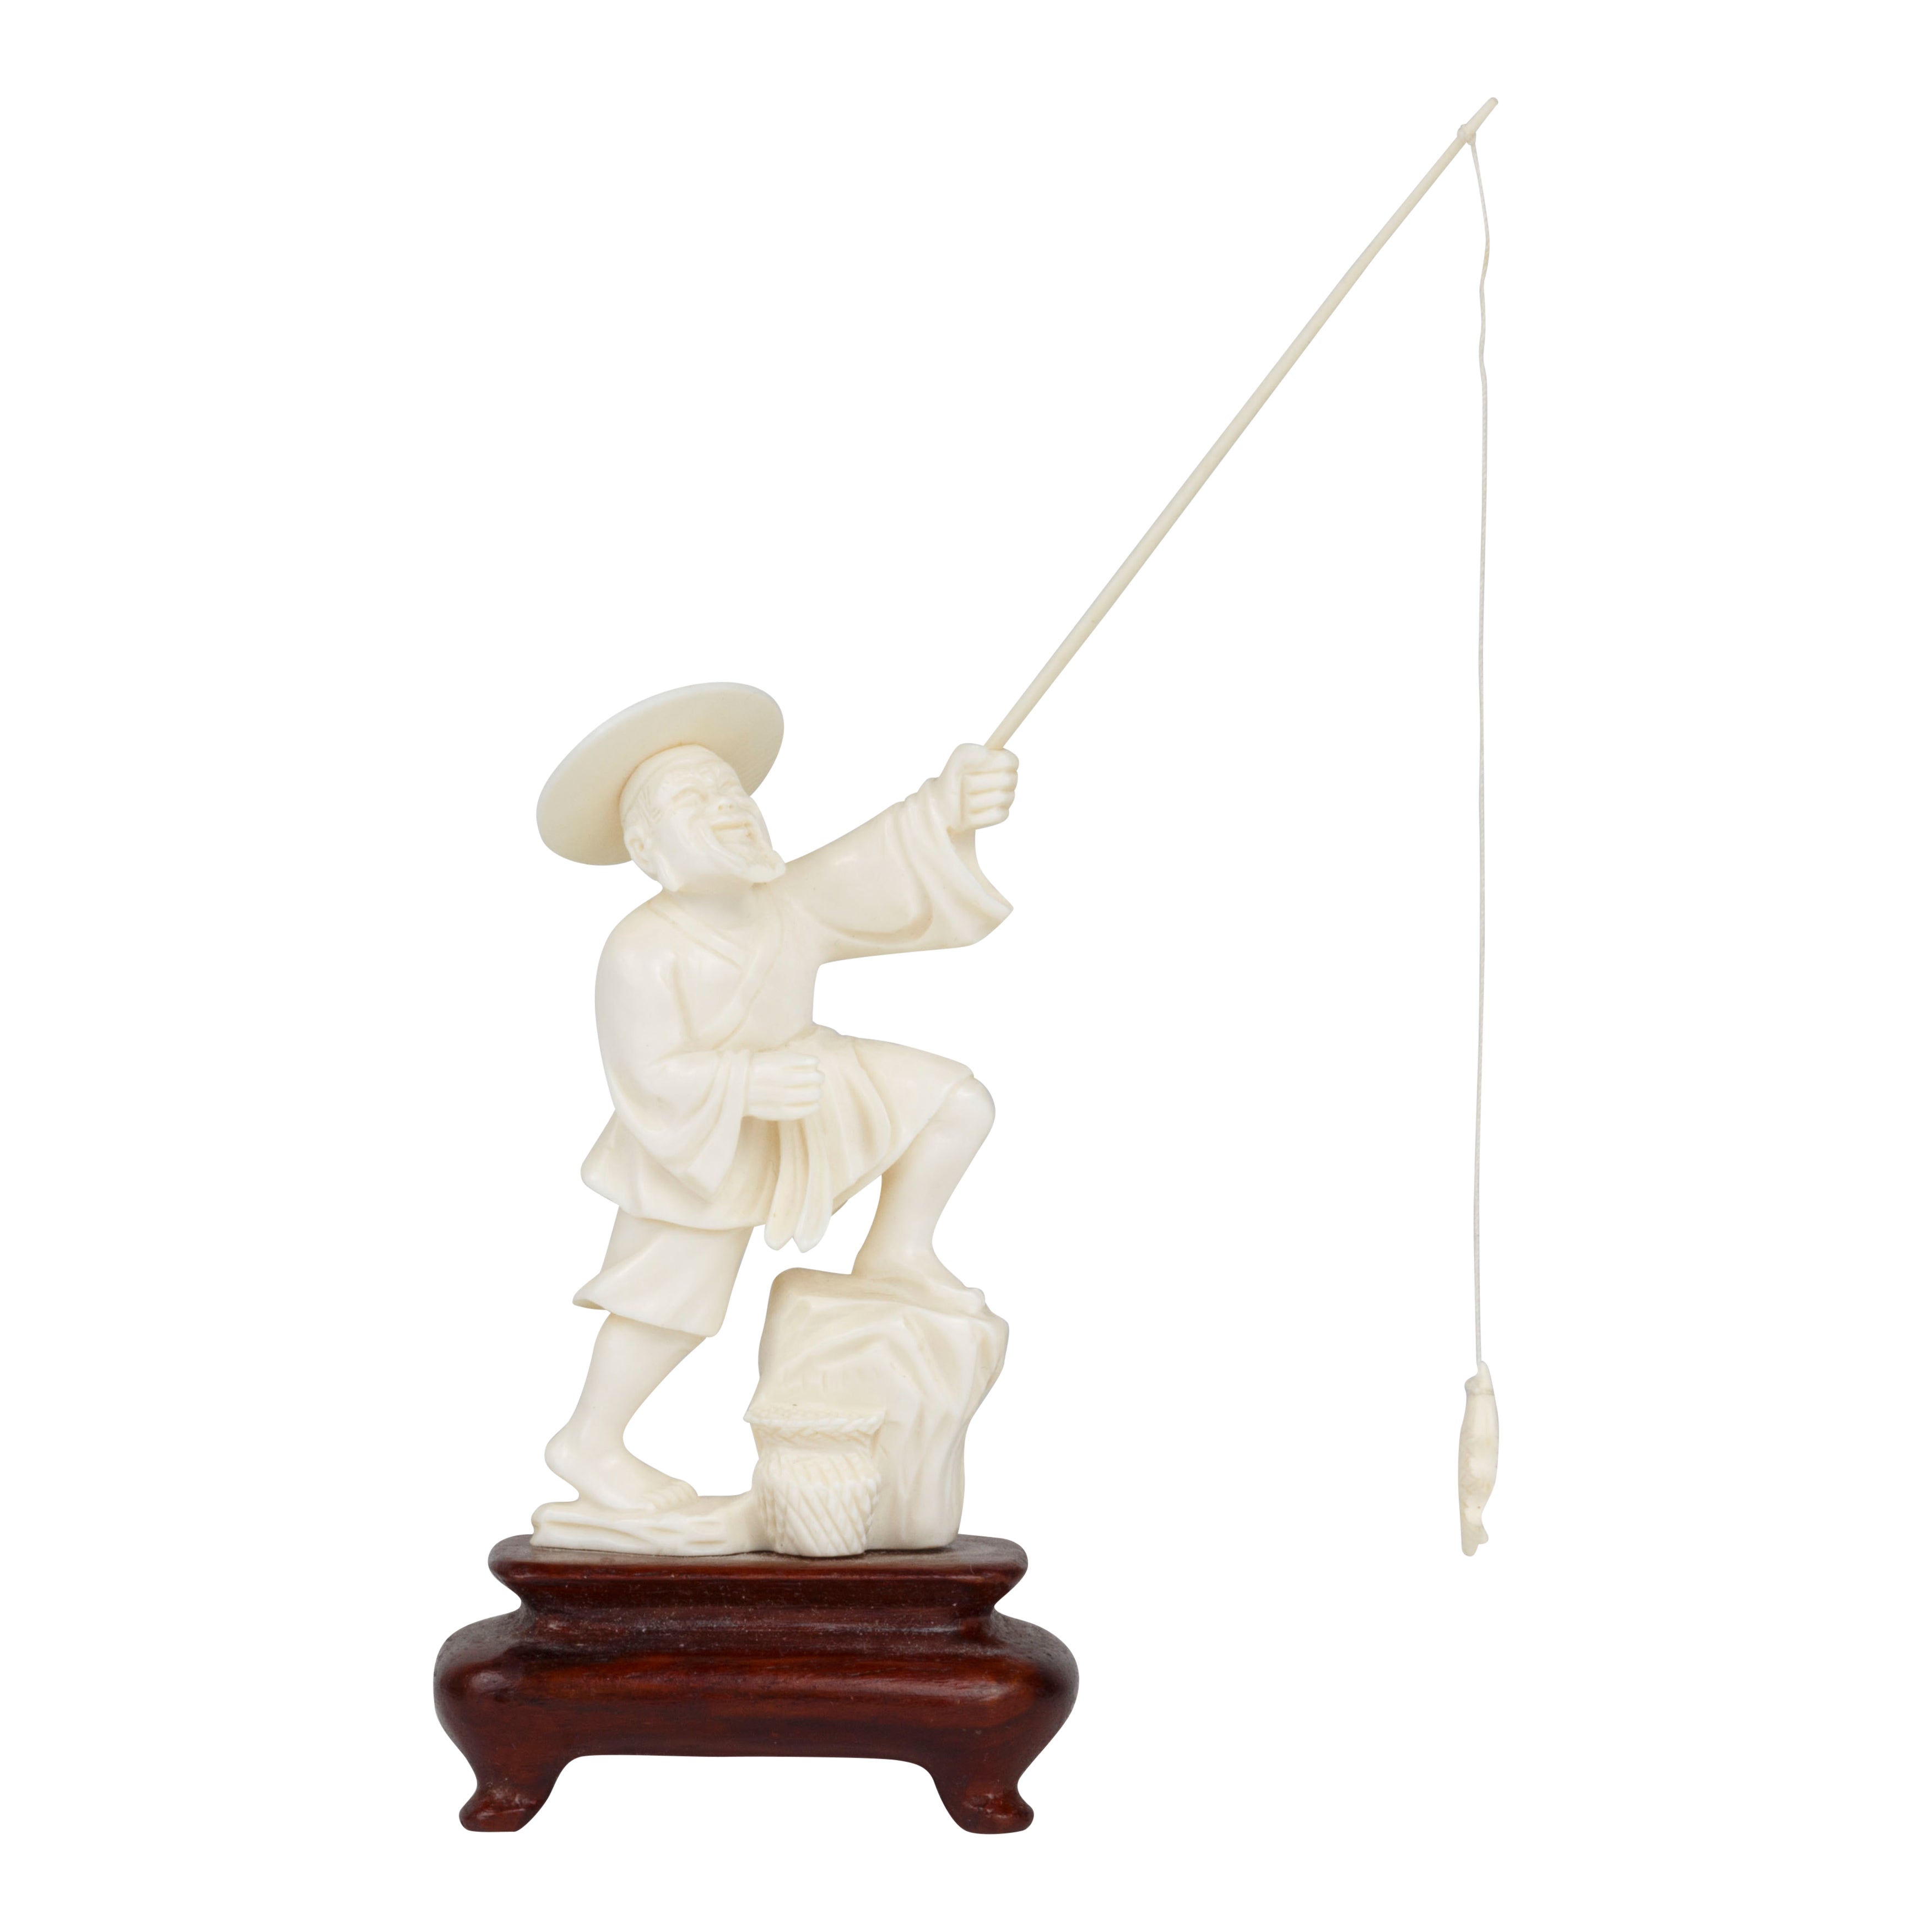 Chinese Fisherman Ivory Carving, Furnishings, Decor, Carving